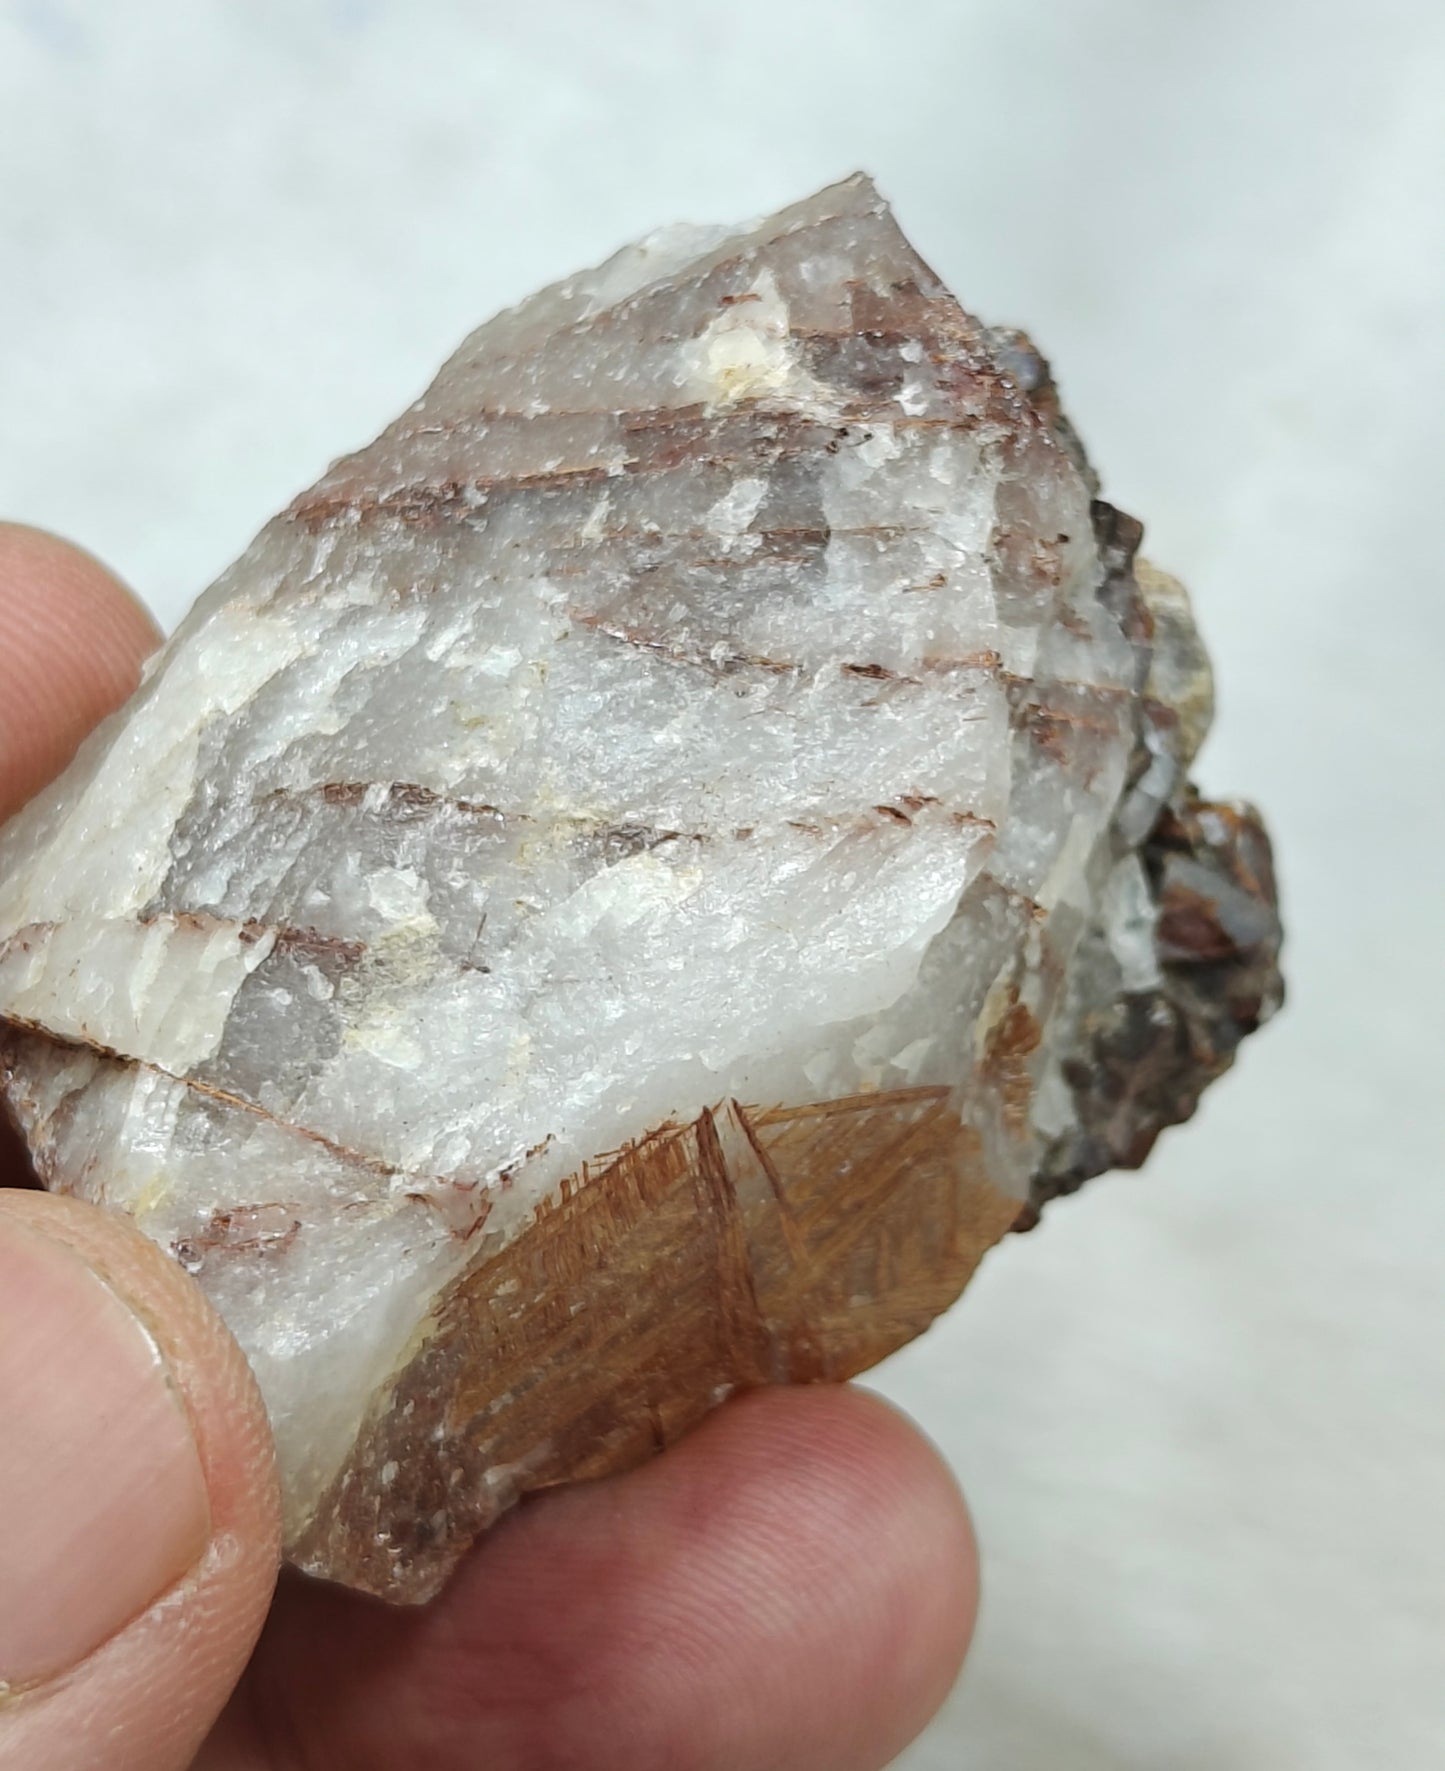 Natural Quartz Crystal with Rutiles Saginite and siderite inclusions 71 grams